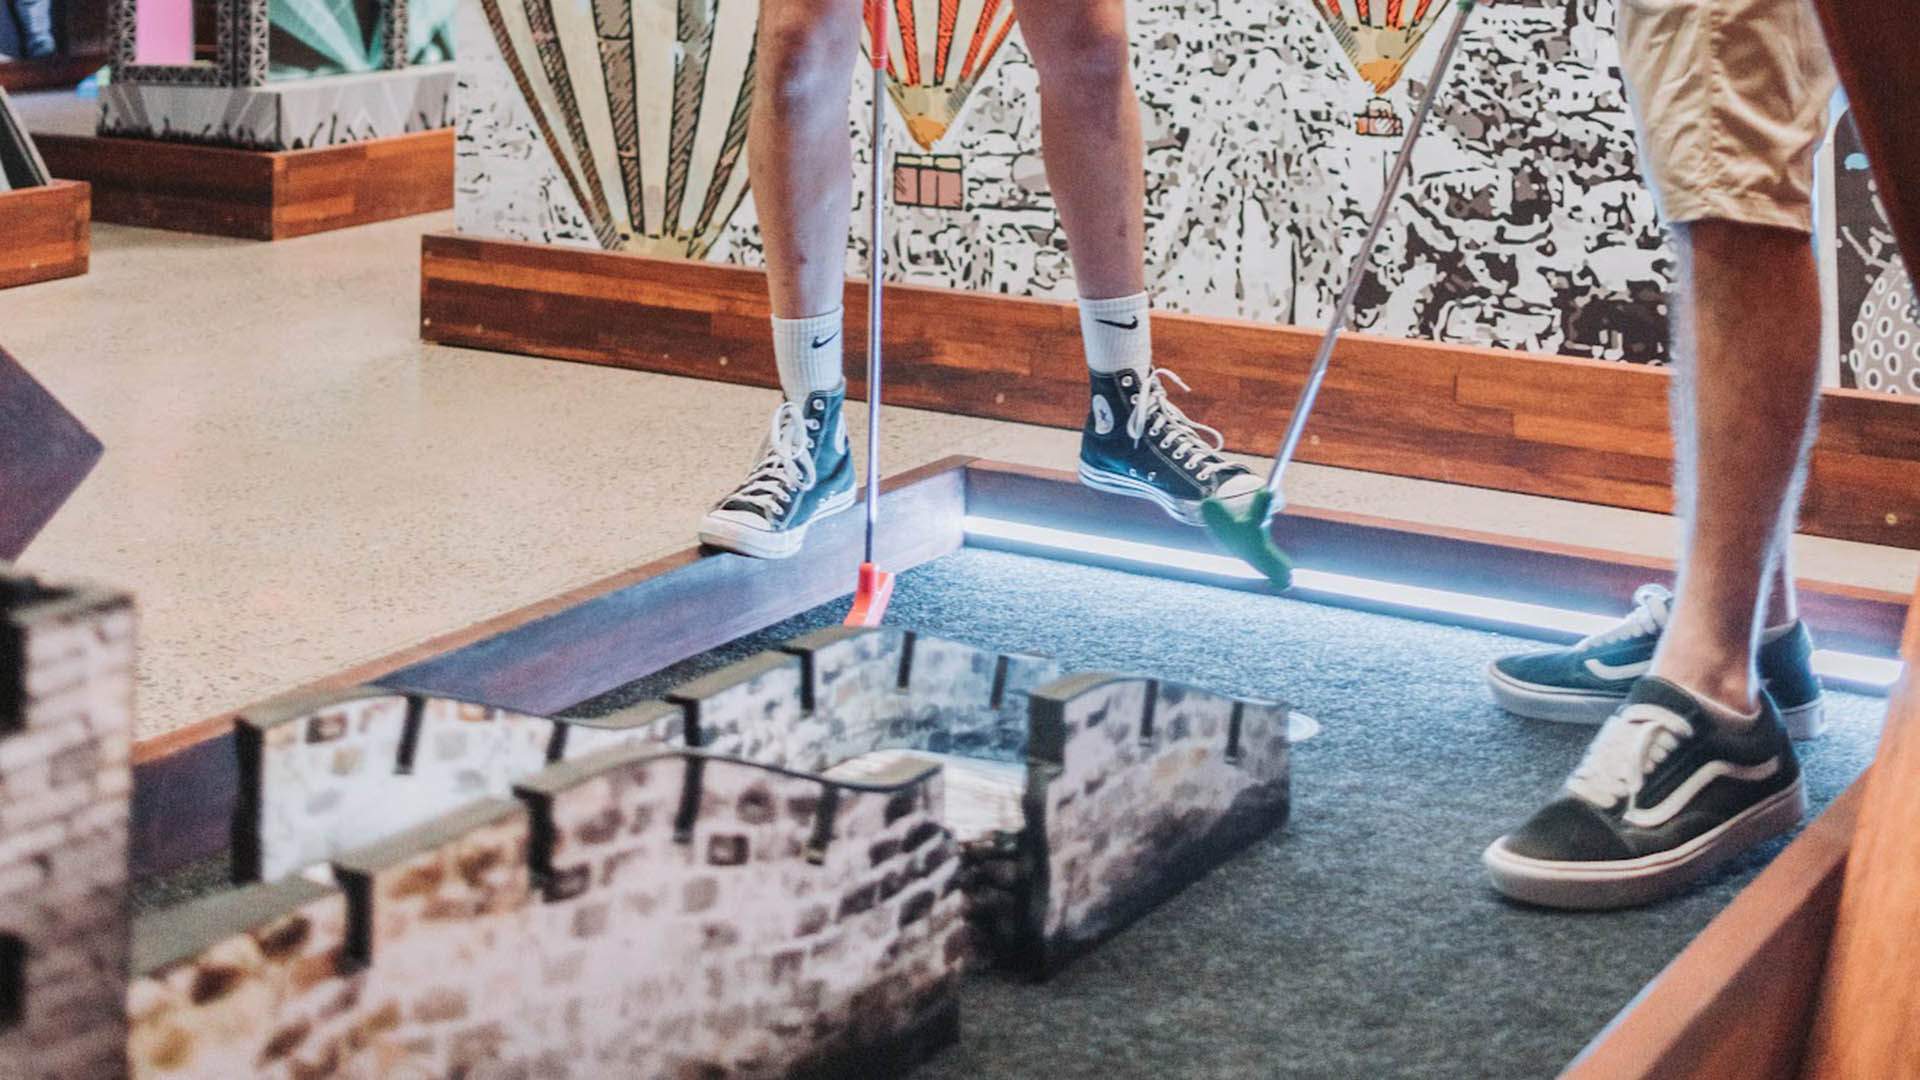 Coming Soon: South Bank Is Getting a 12-Hole Indoor Mini-Golf Course and Golf Simulator with a Bar